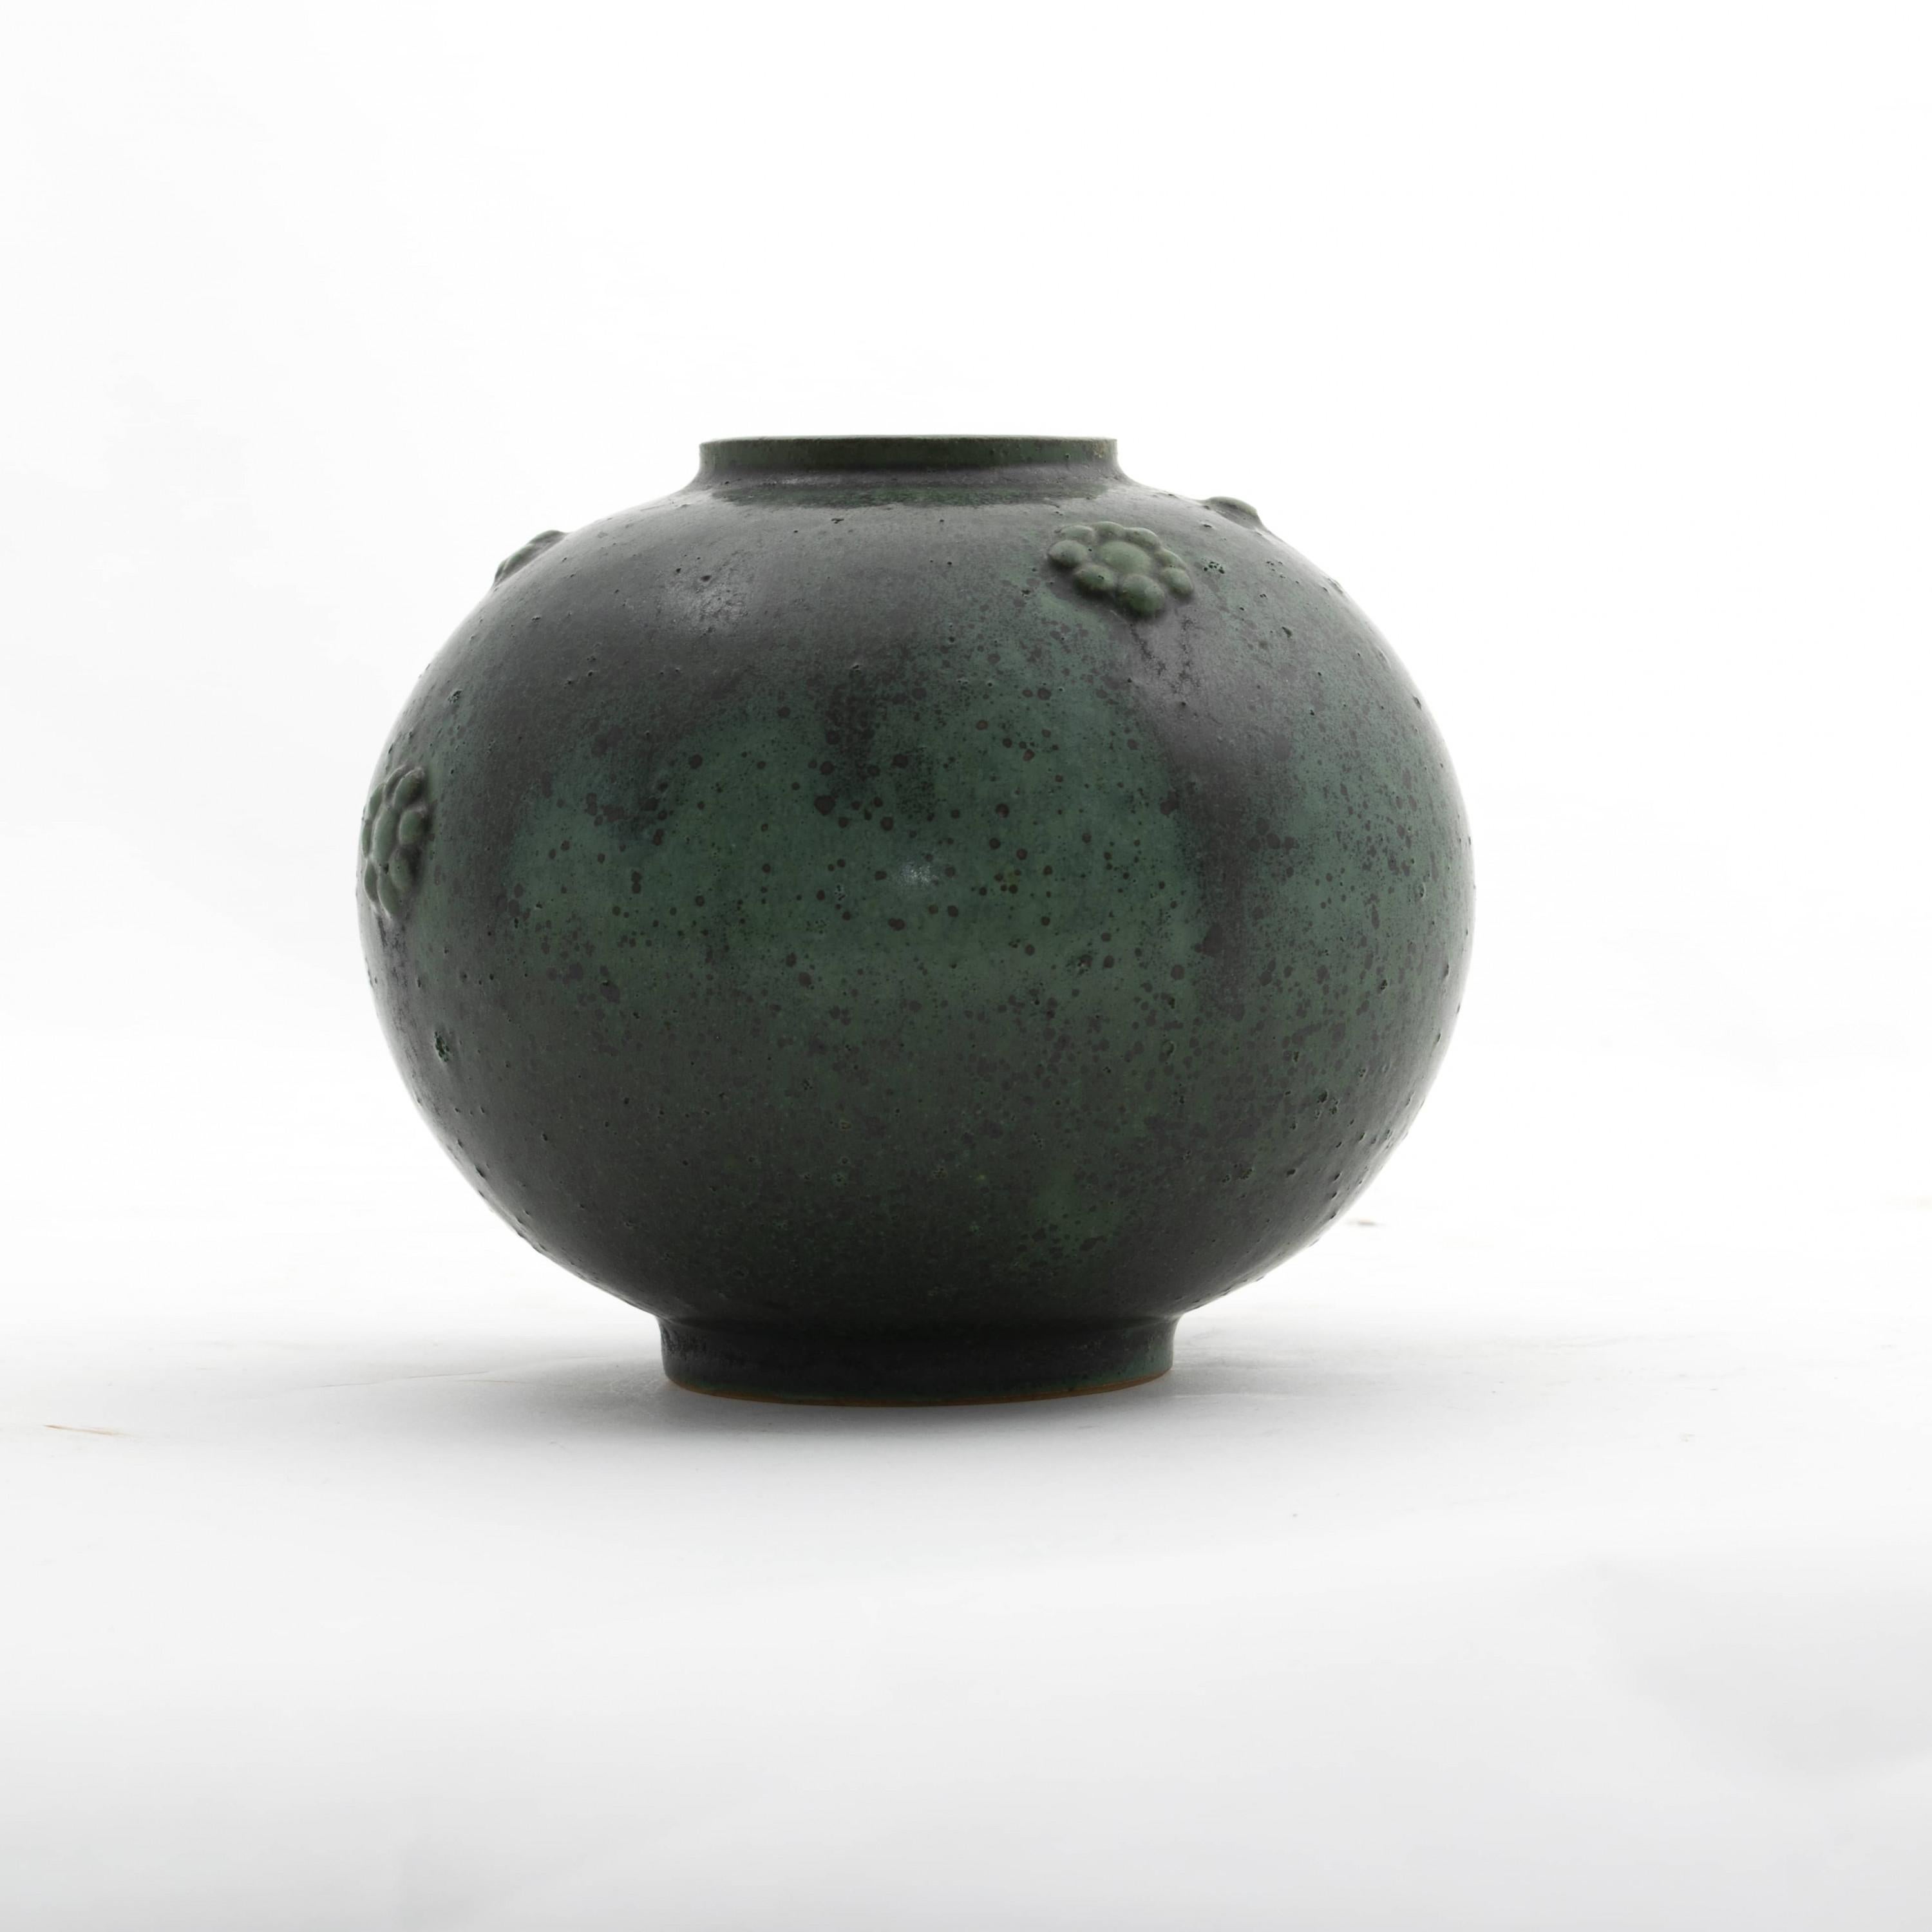 Arne Bang 1902-1983.
Spherical stoneware vase with green speckled glaze, decorated with scattered flowers.
Signed with monogram AB at the bottom.
Denmark 1950s.